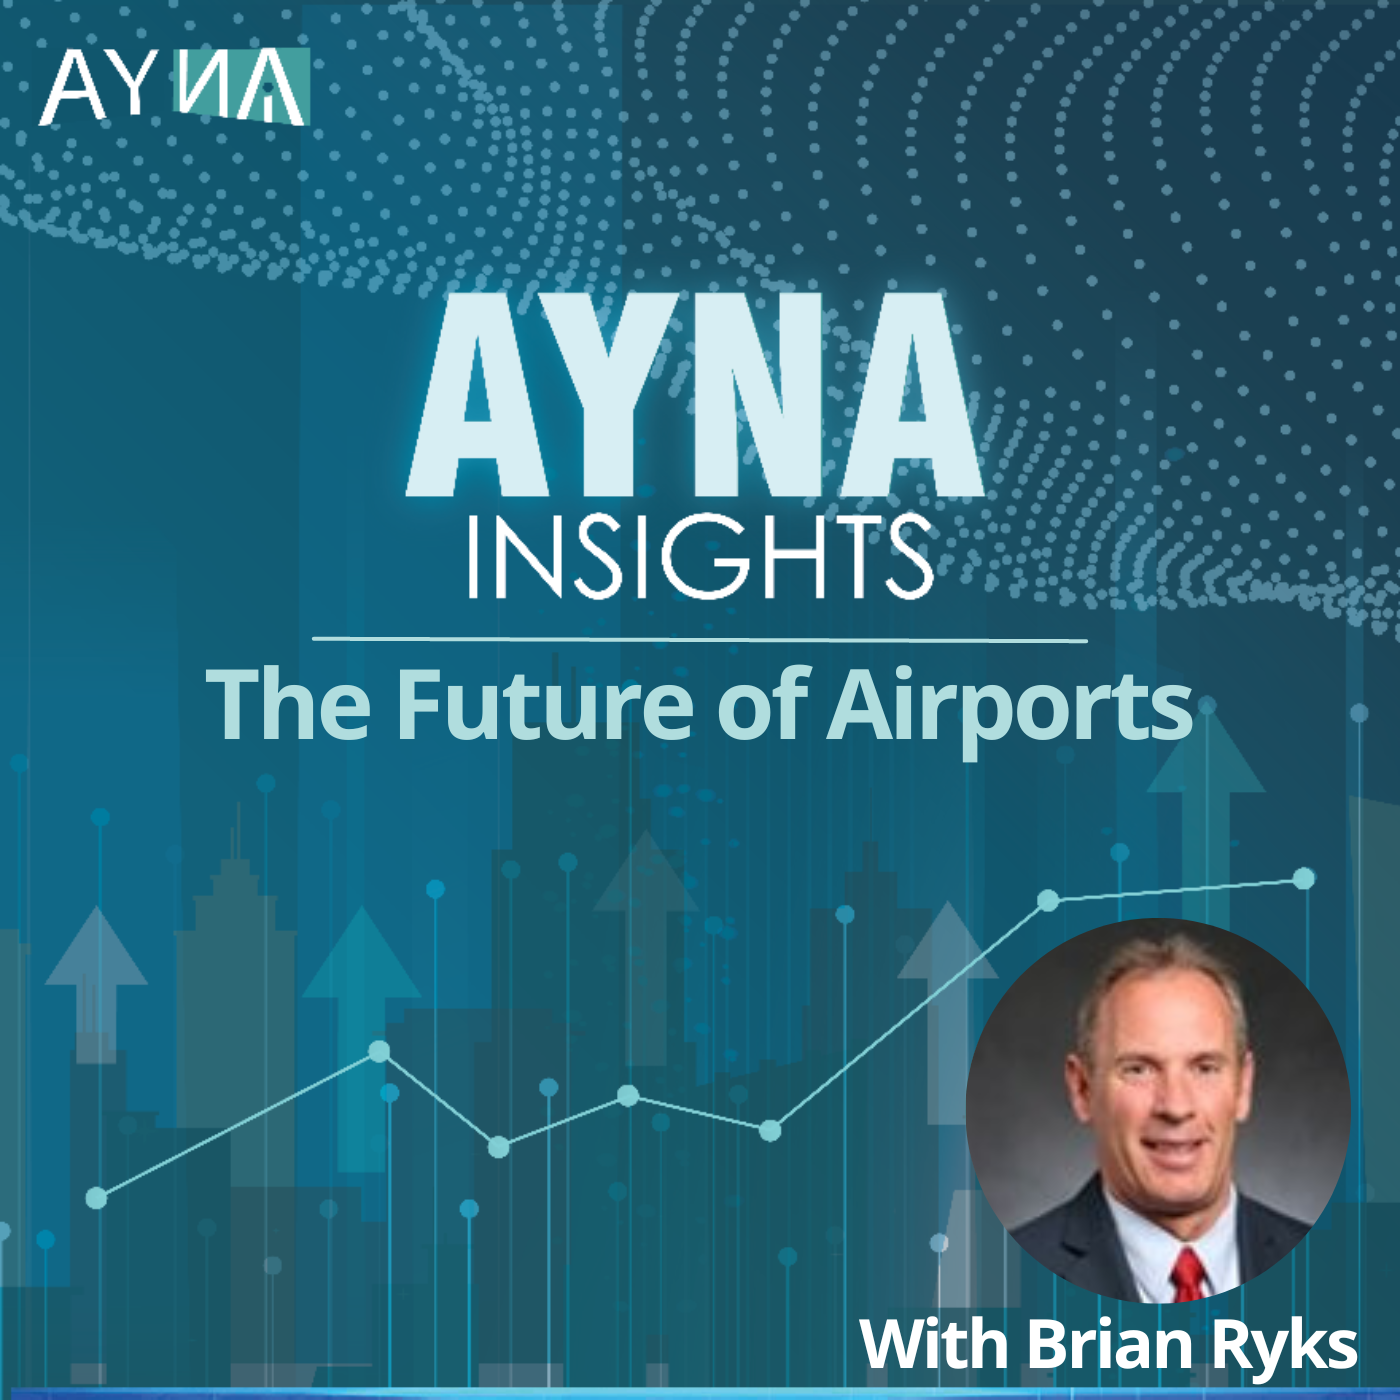 Brian Ryks: The Future of Airports